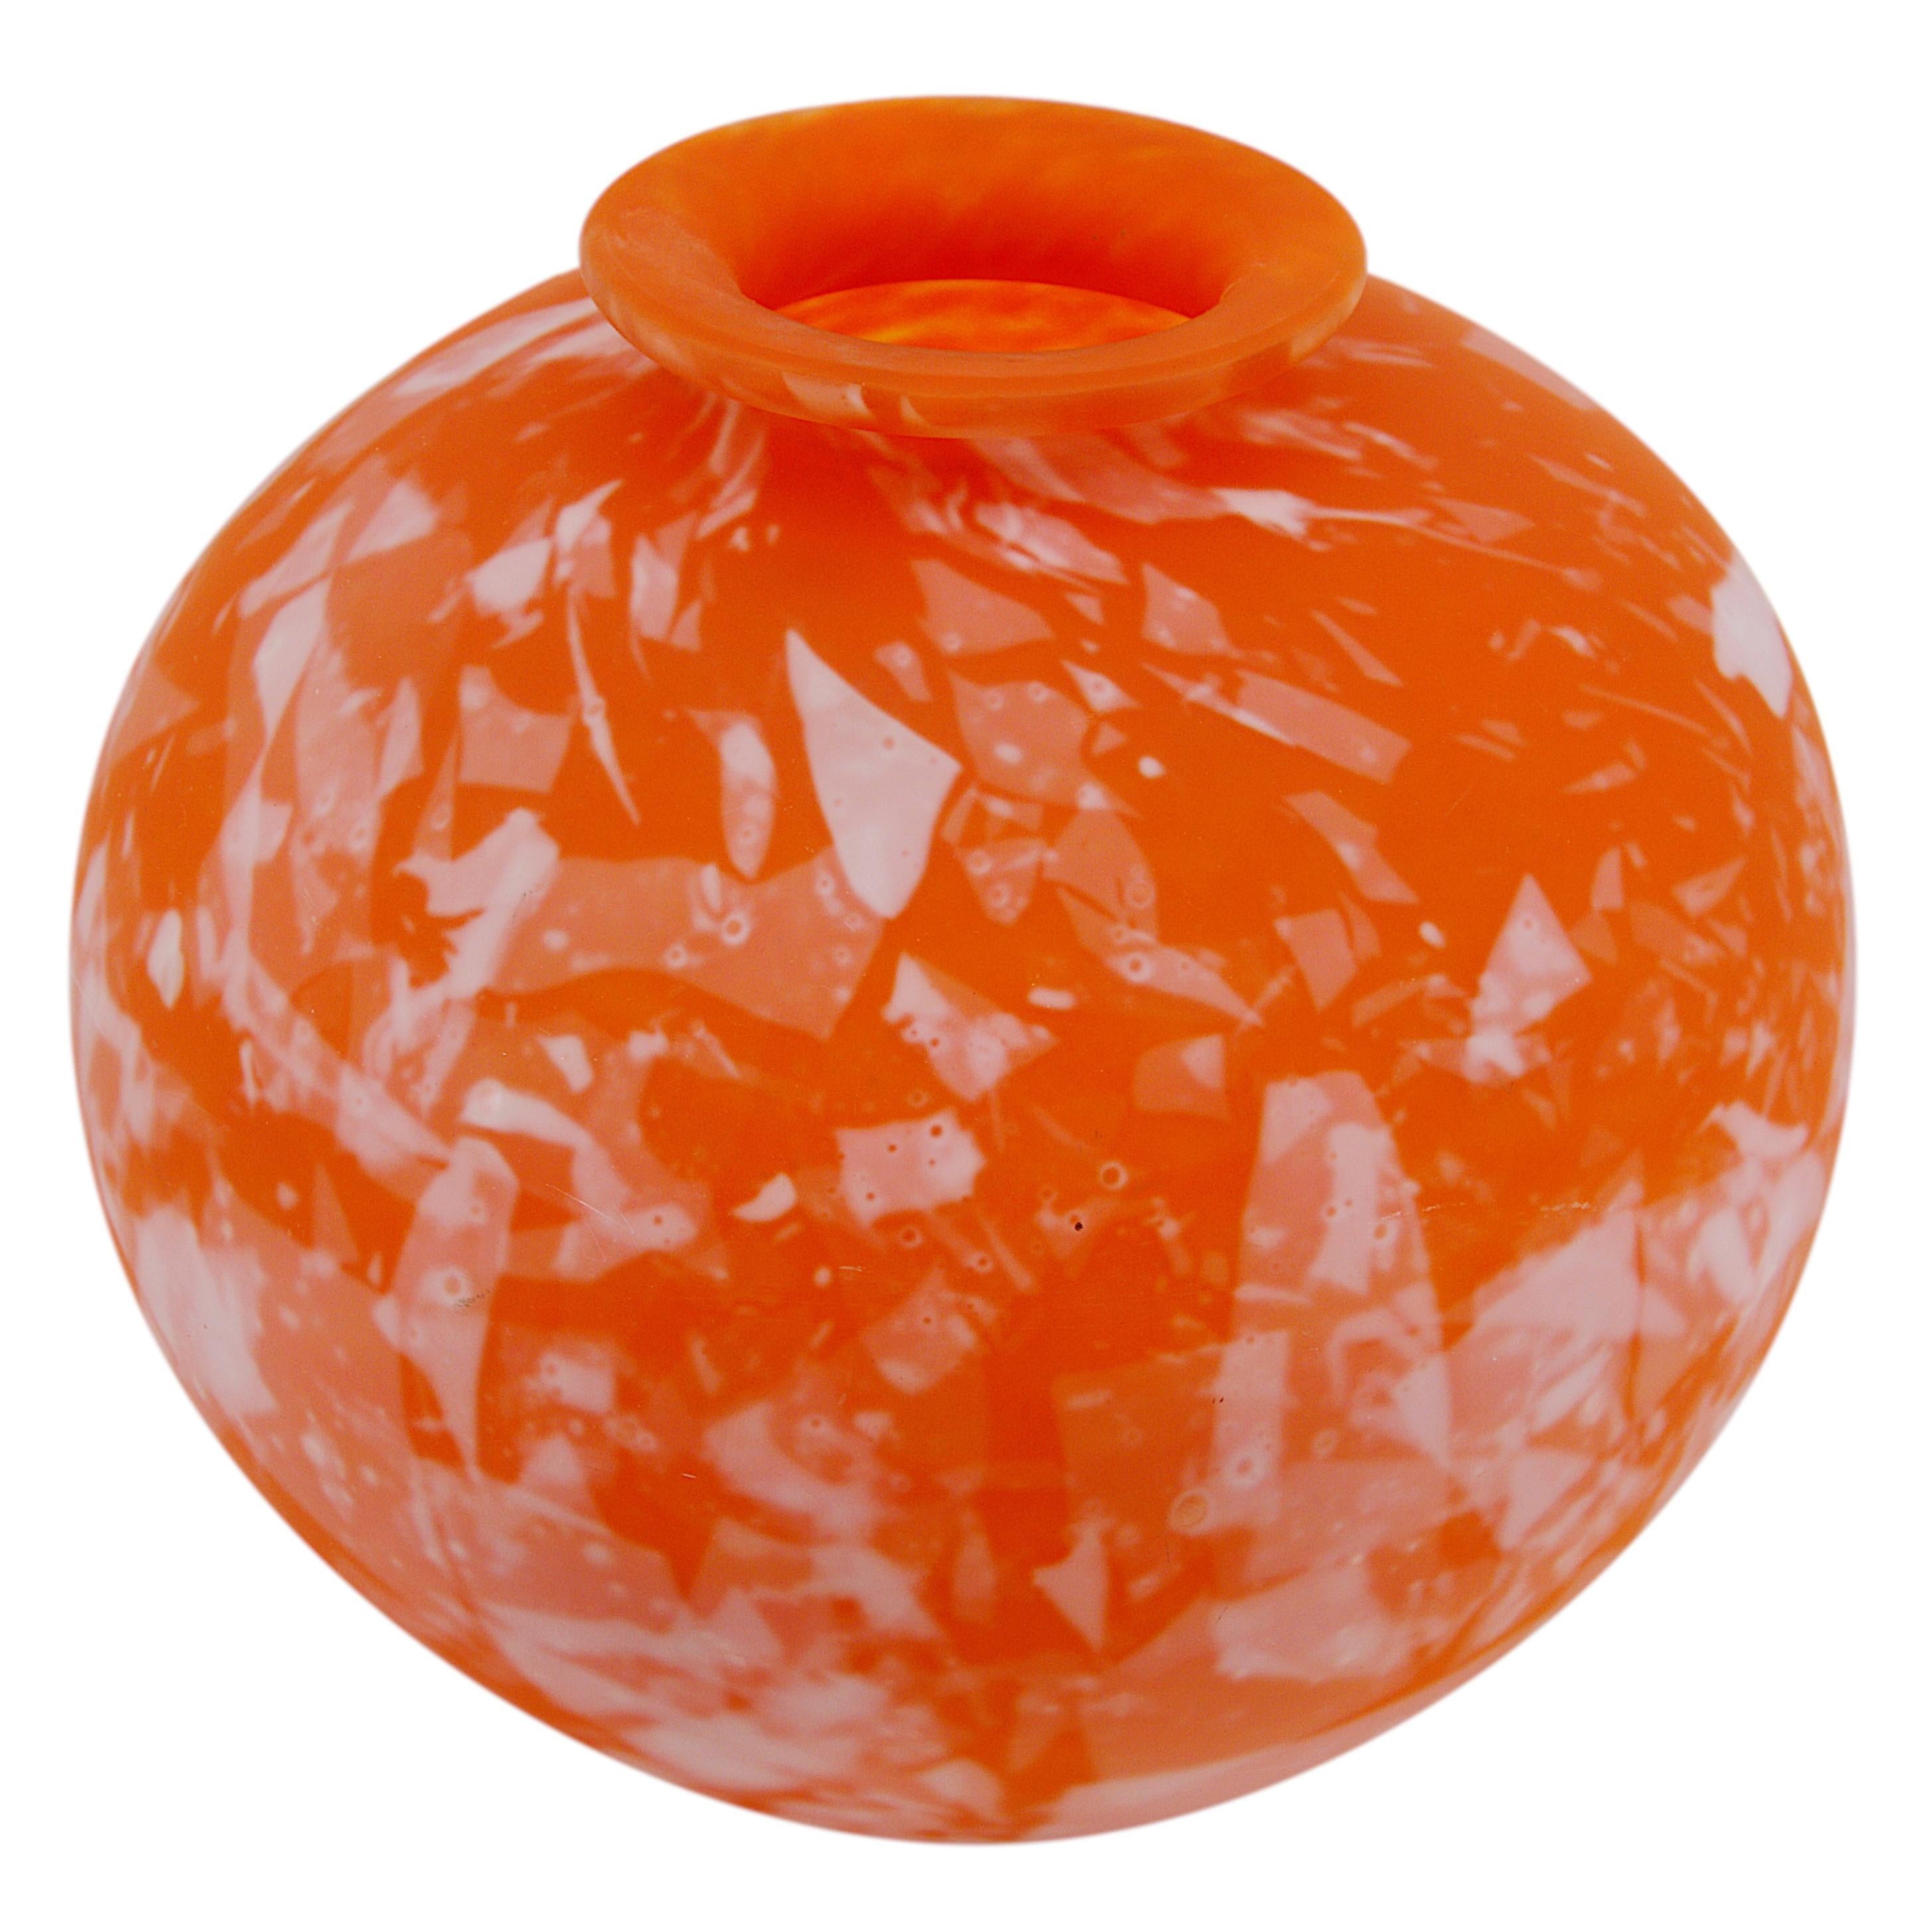 Large french Art Deco vase by Daum (Croismare, Nancy), France, late 1920s. Very thick blown glass vase showing a marmorean pattern in red/orange and white. Height: 10.6